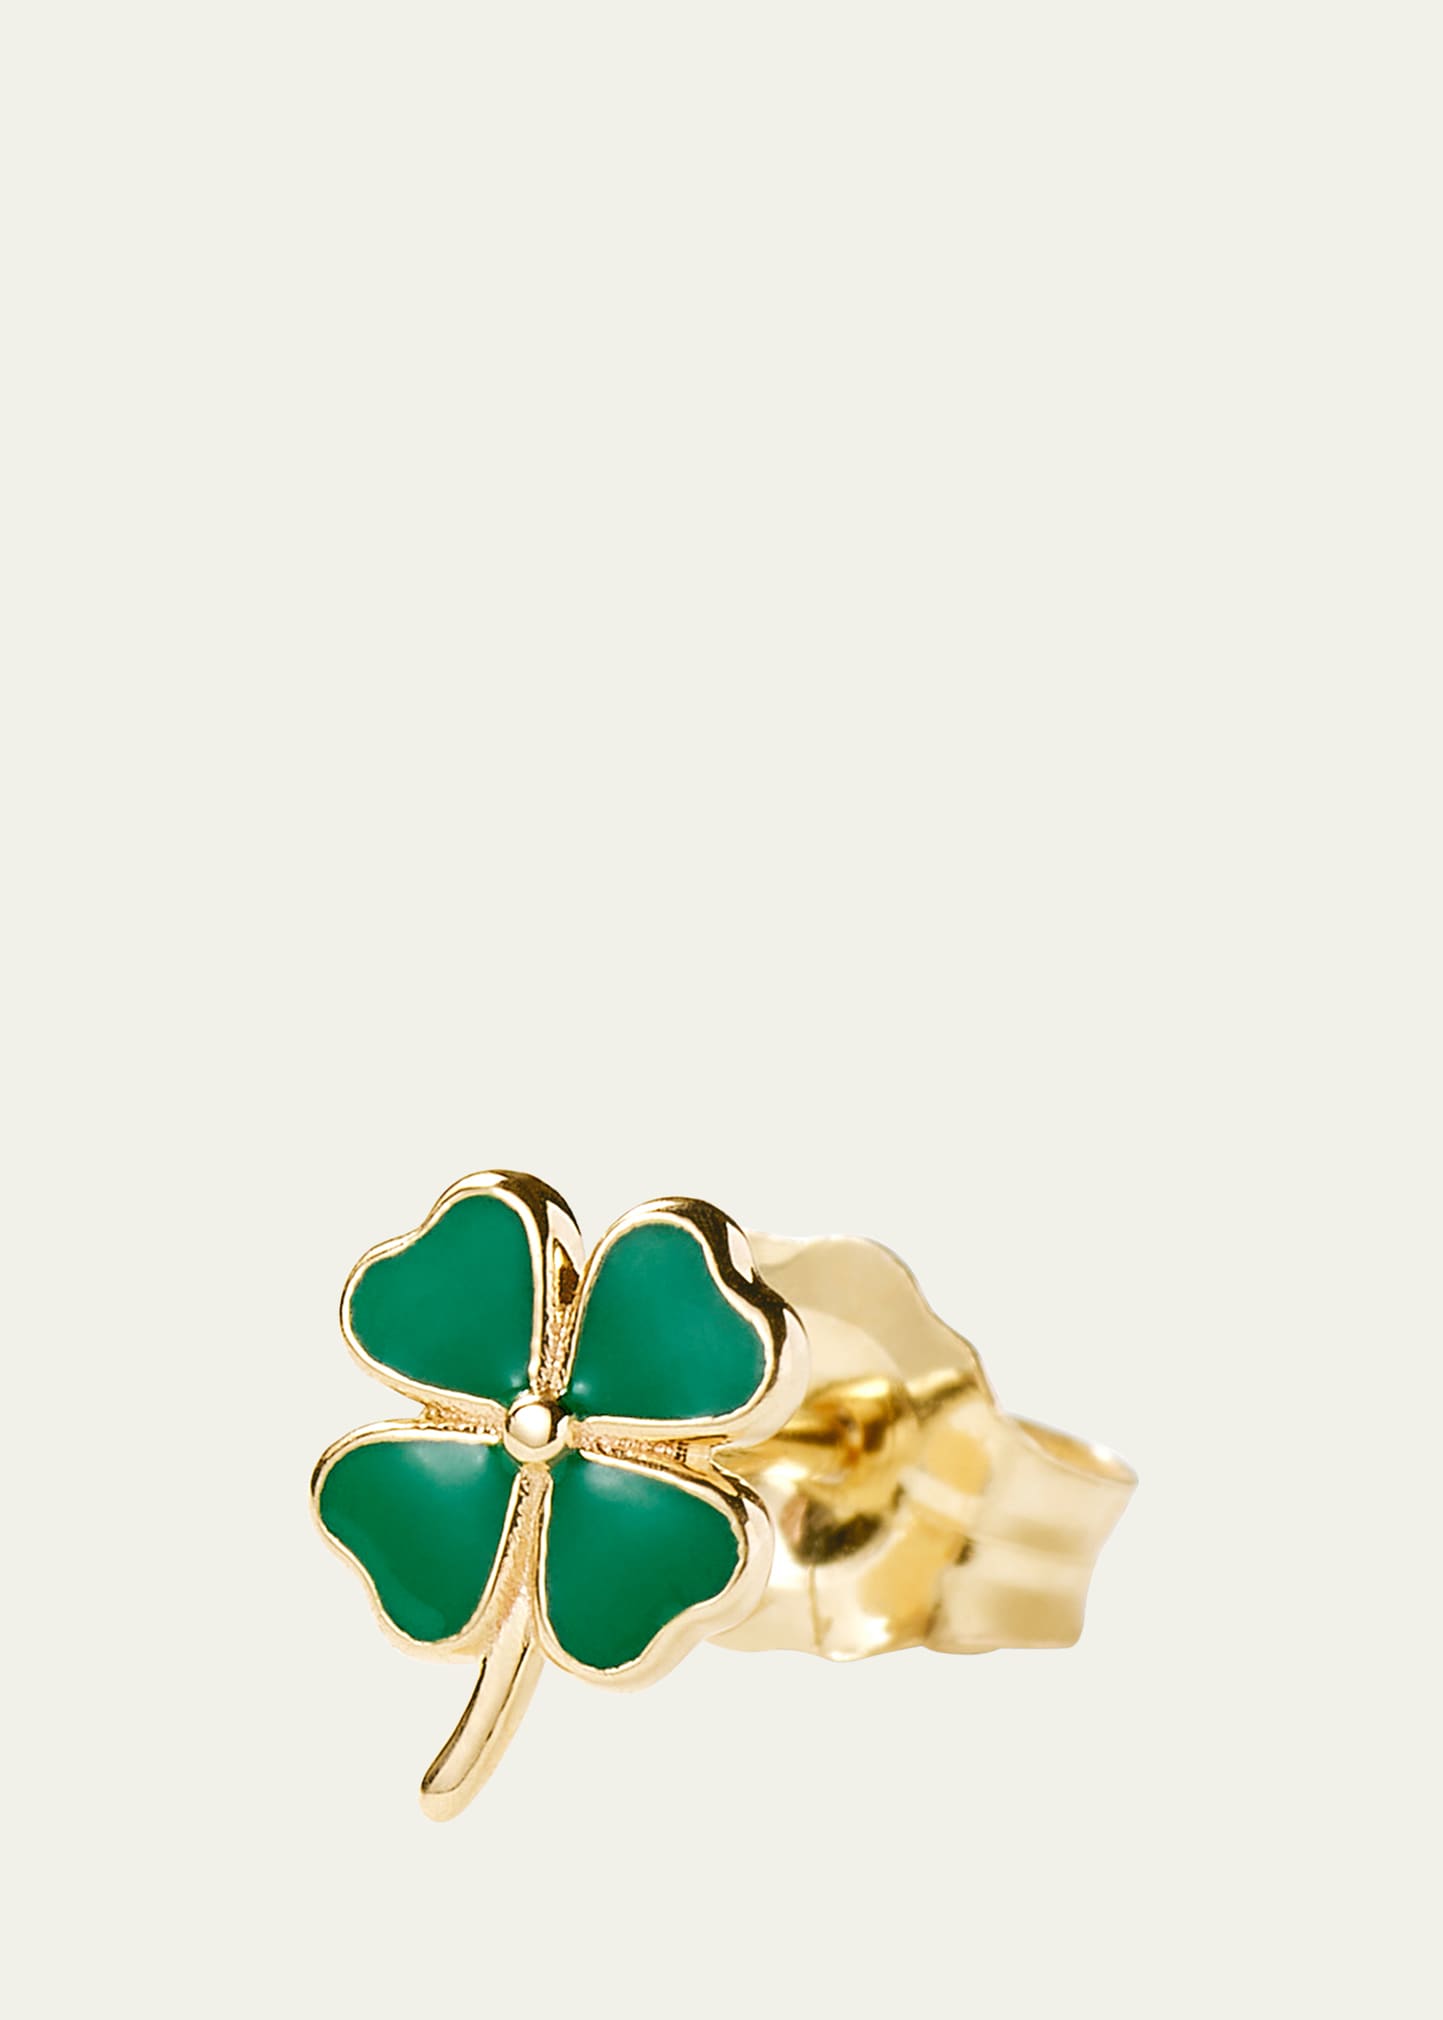 14K Yellow Gold Four Leaf Clover Stud Earring, Single